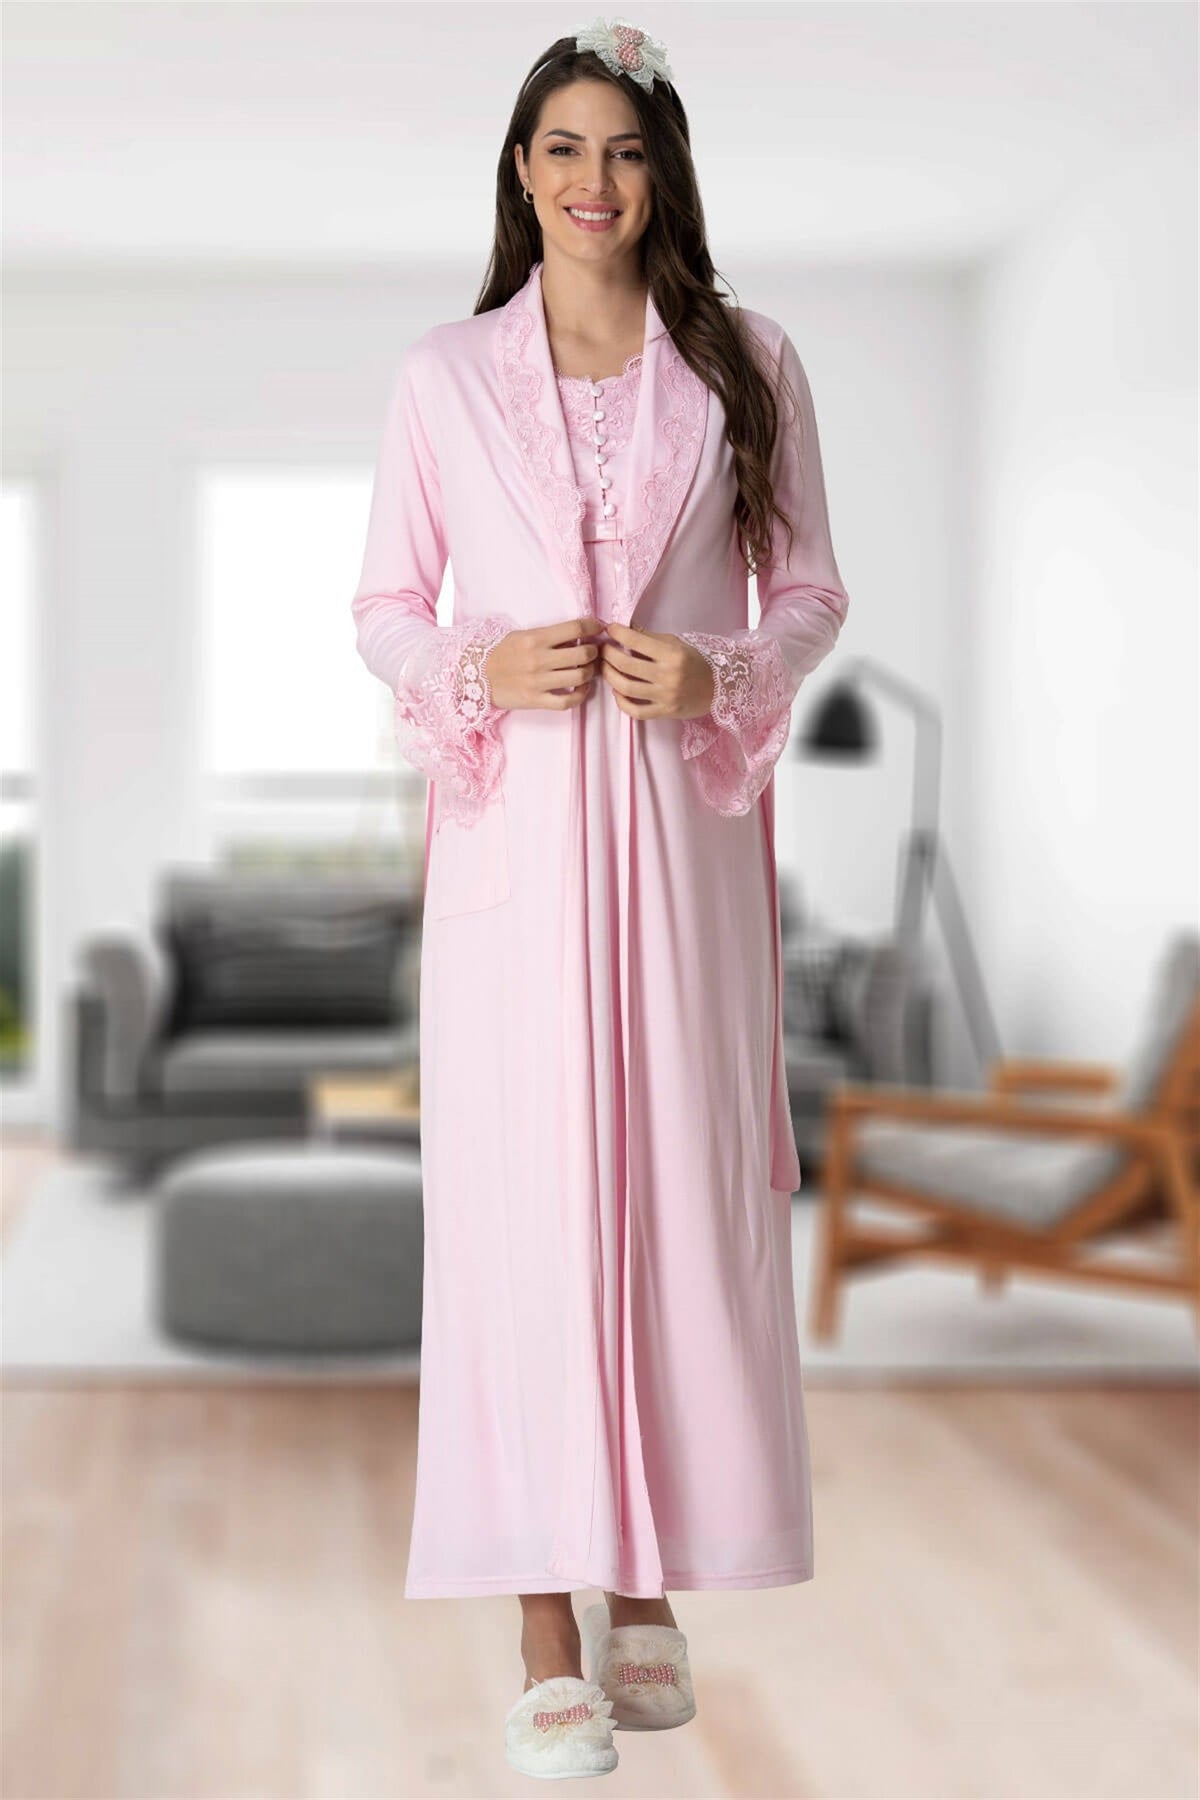 Shopymommy 5417 Elegant Lace Maternity & Nursing Nightgown With Robe Pink